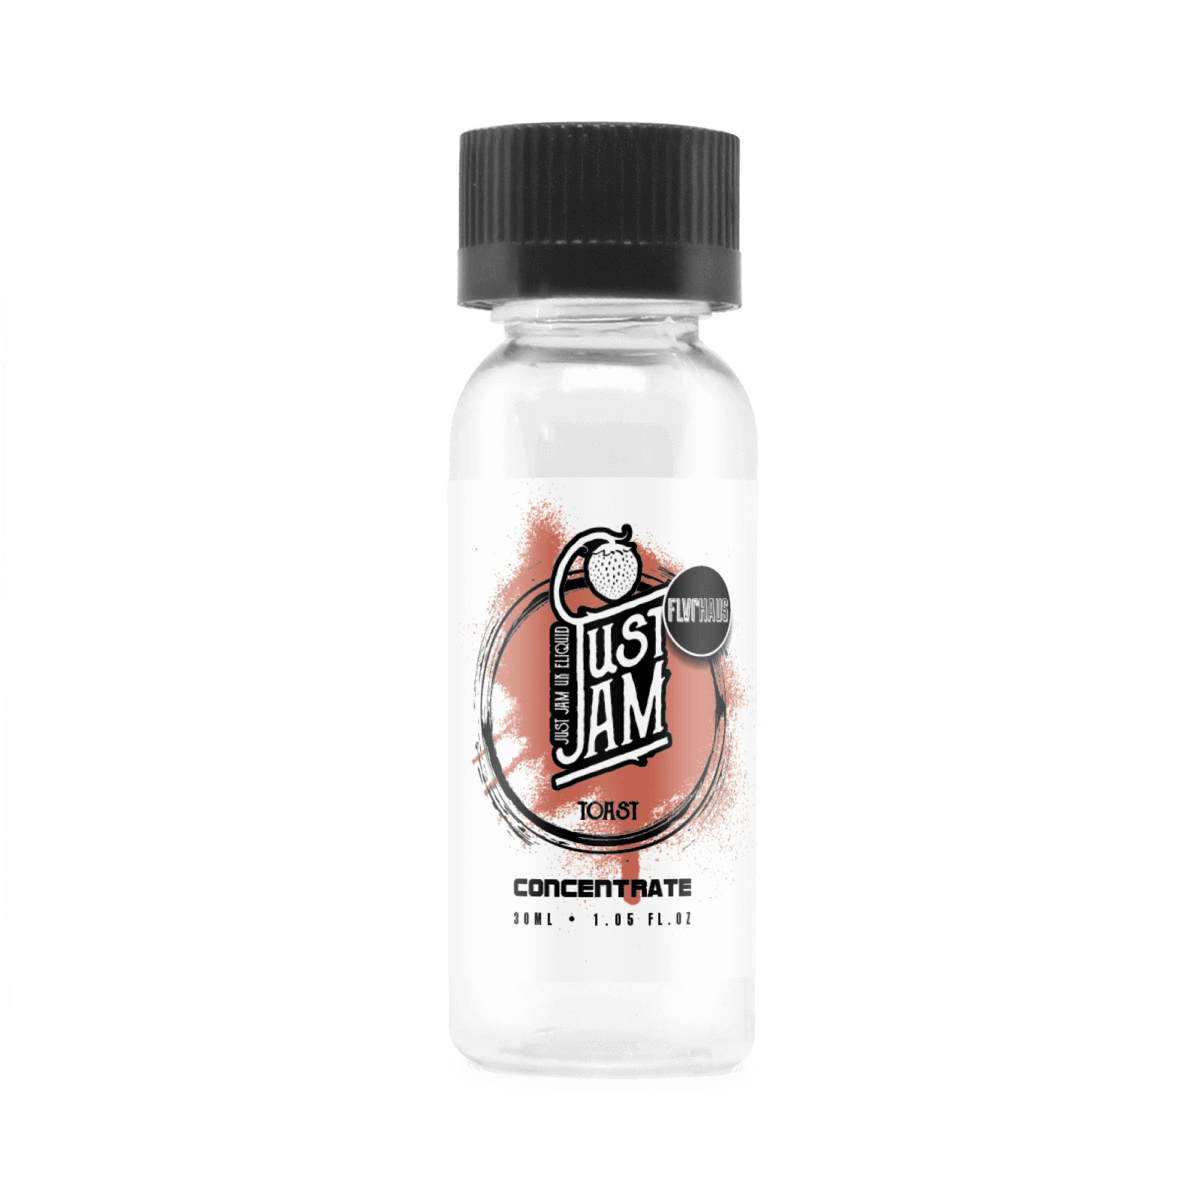 Toast Concentrate E-Liquid by Just Jam 30ml